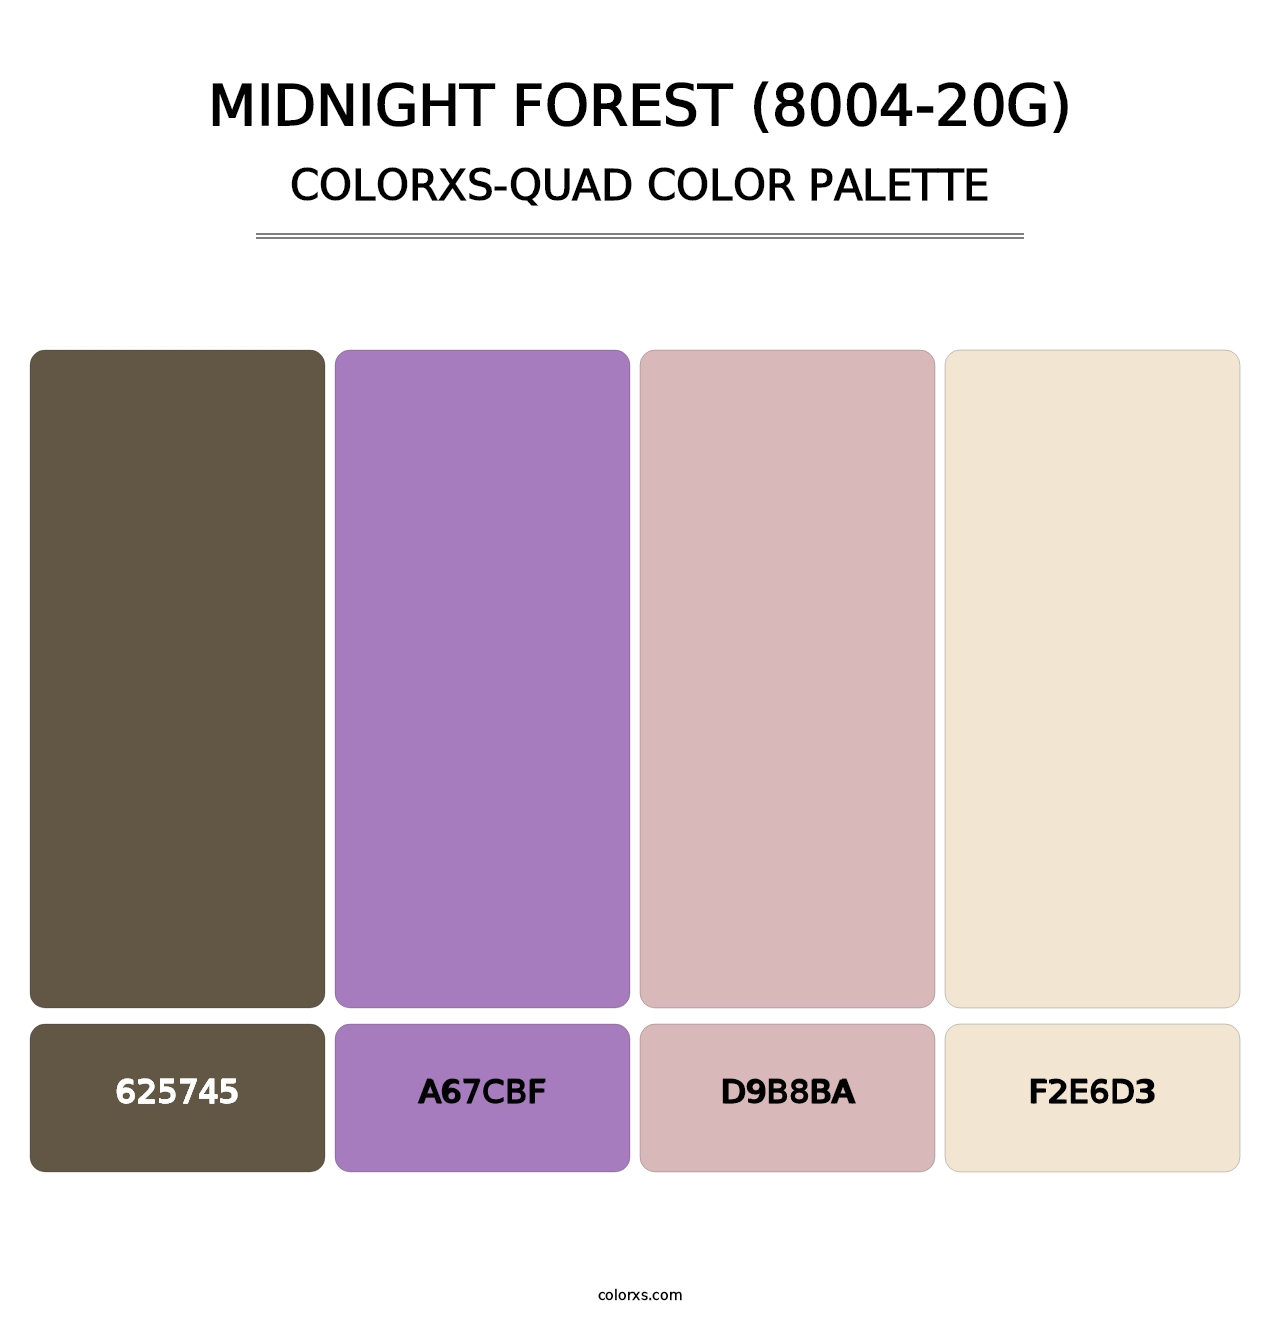 Midnight Forest (8004-20G) - Colorxs Quad Palette